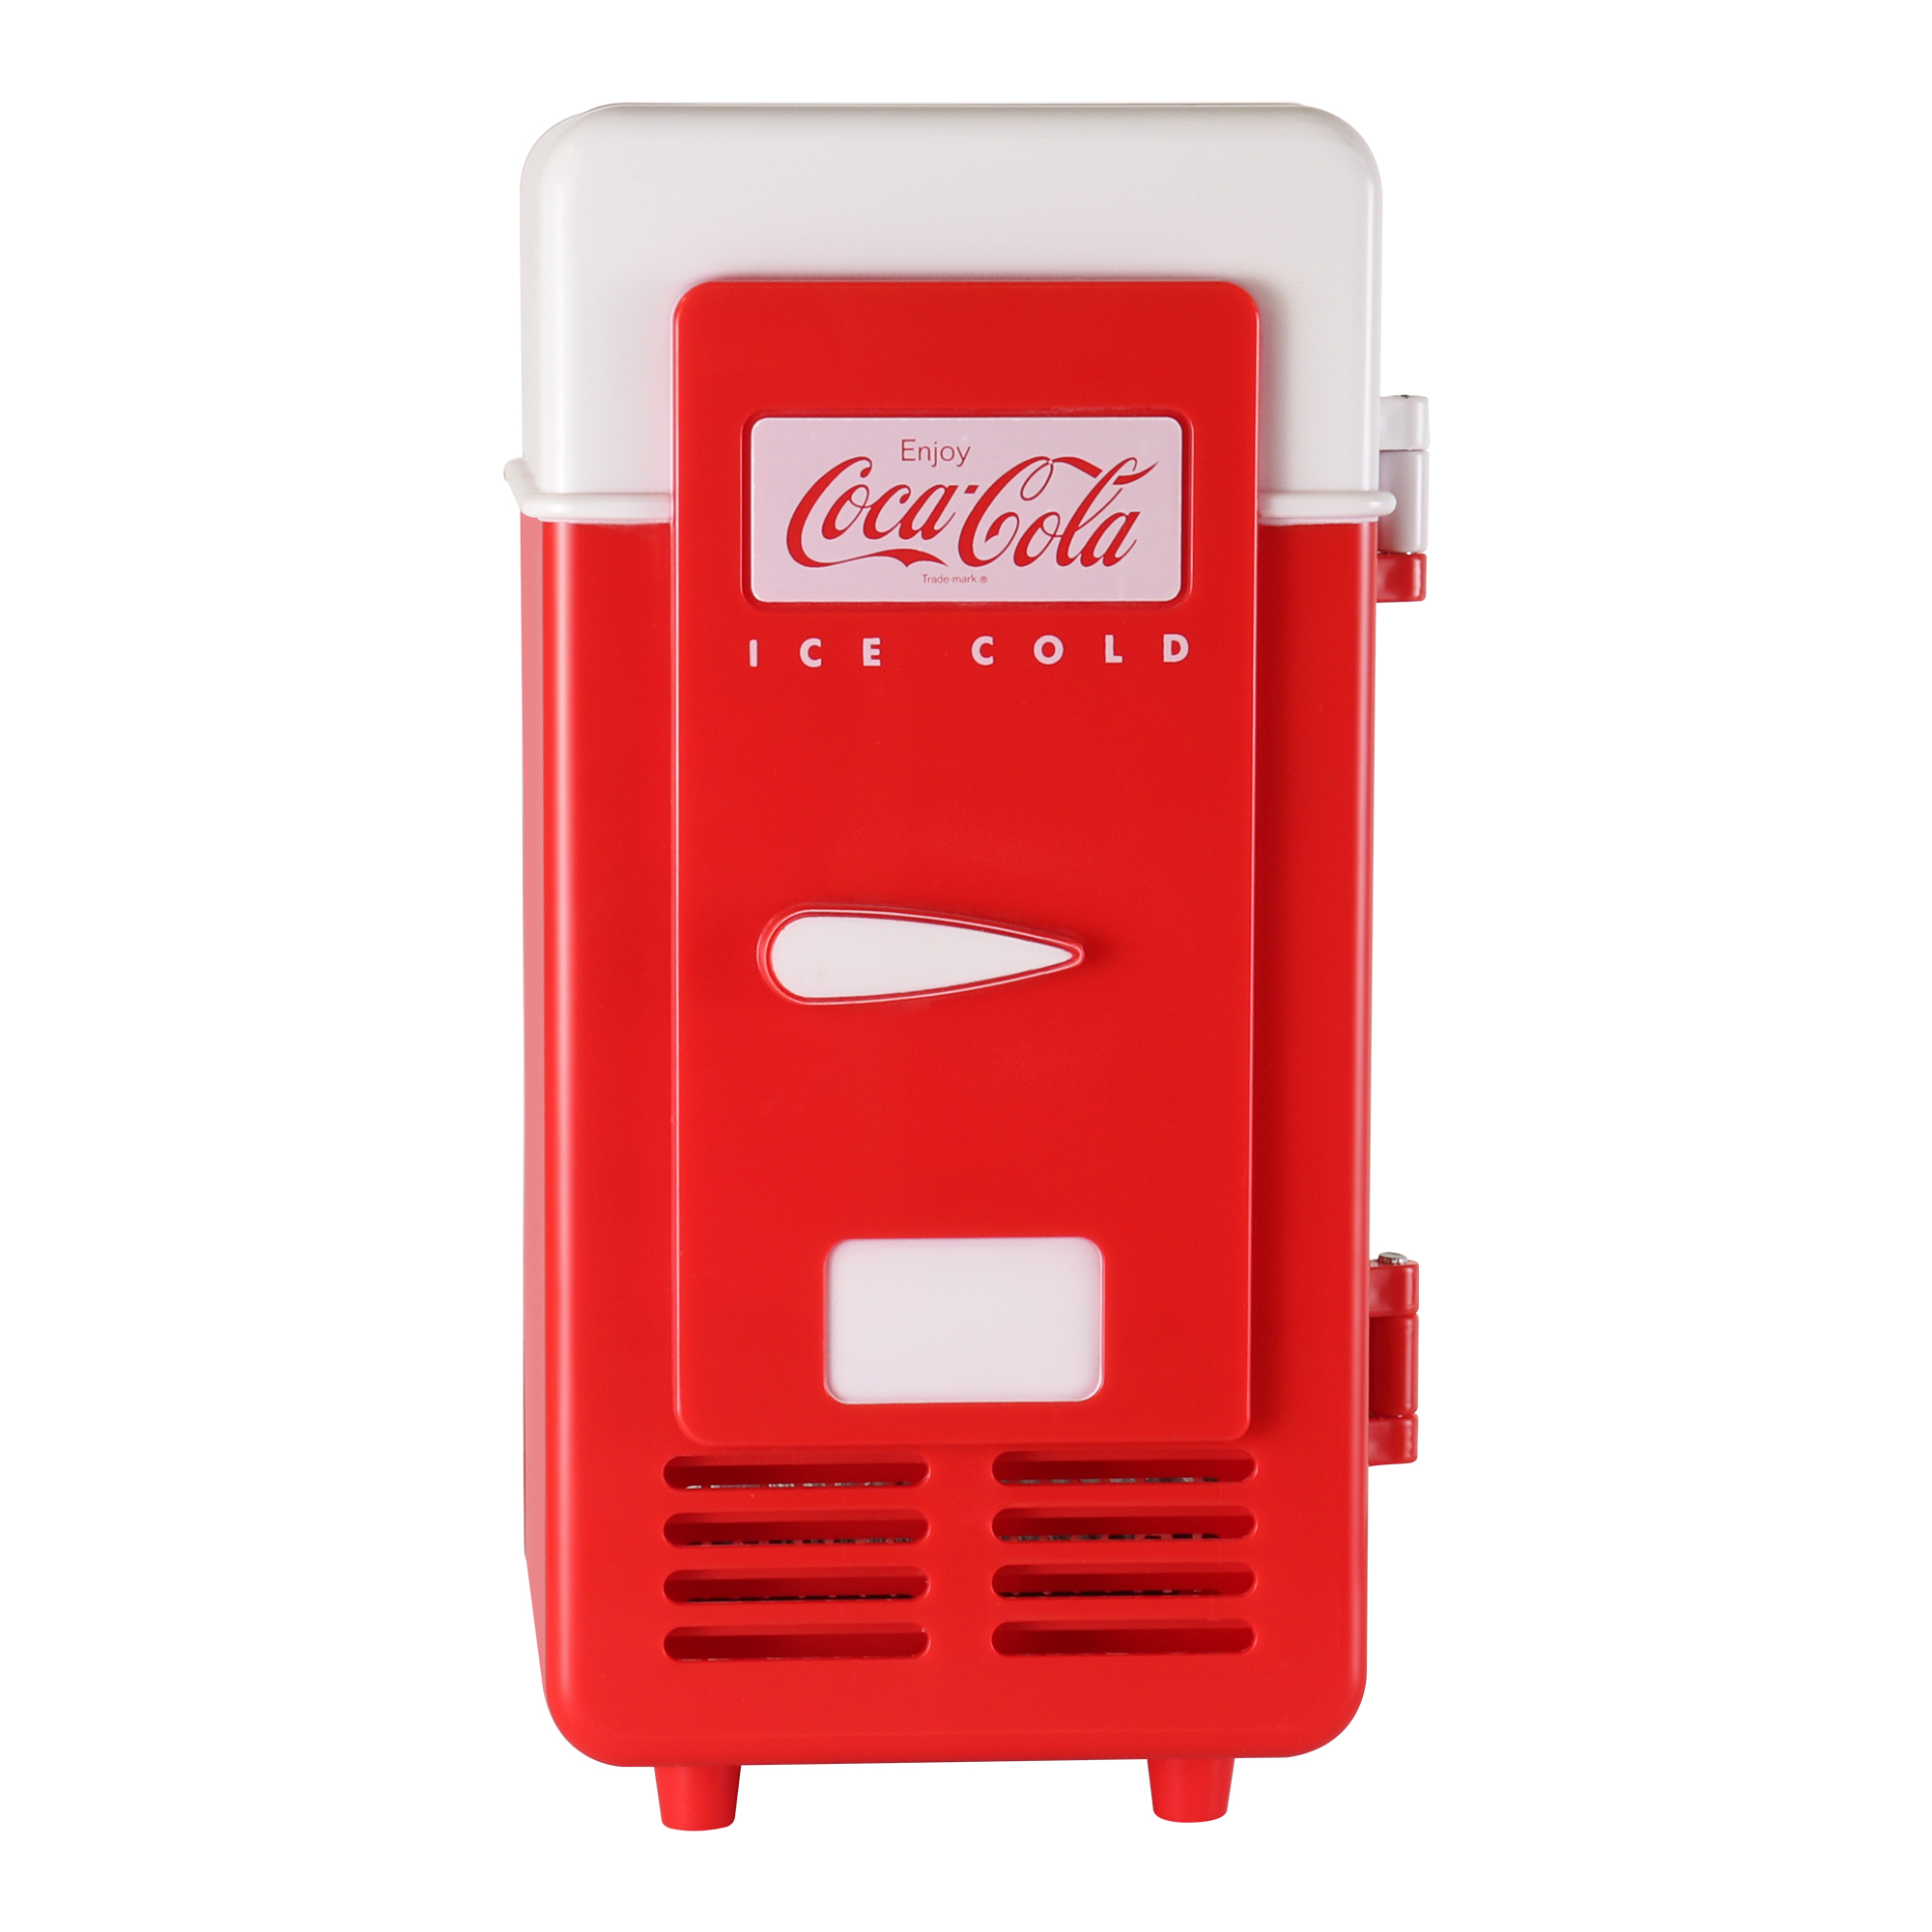 Coca-Cola Single Can Cooler, Red, USB Powered Retro One Can Mini Fridge, Thermoelectric Cooler for Desk, Home, Office, Dorm, Unique Gift for Students or Office Workers - image 1 of 5